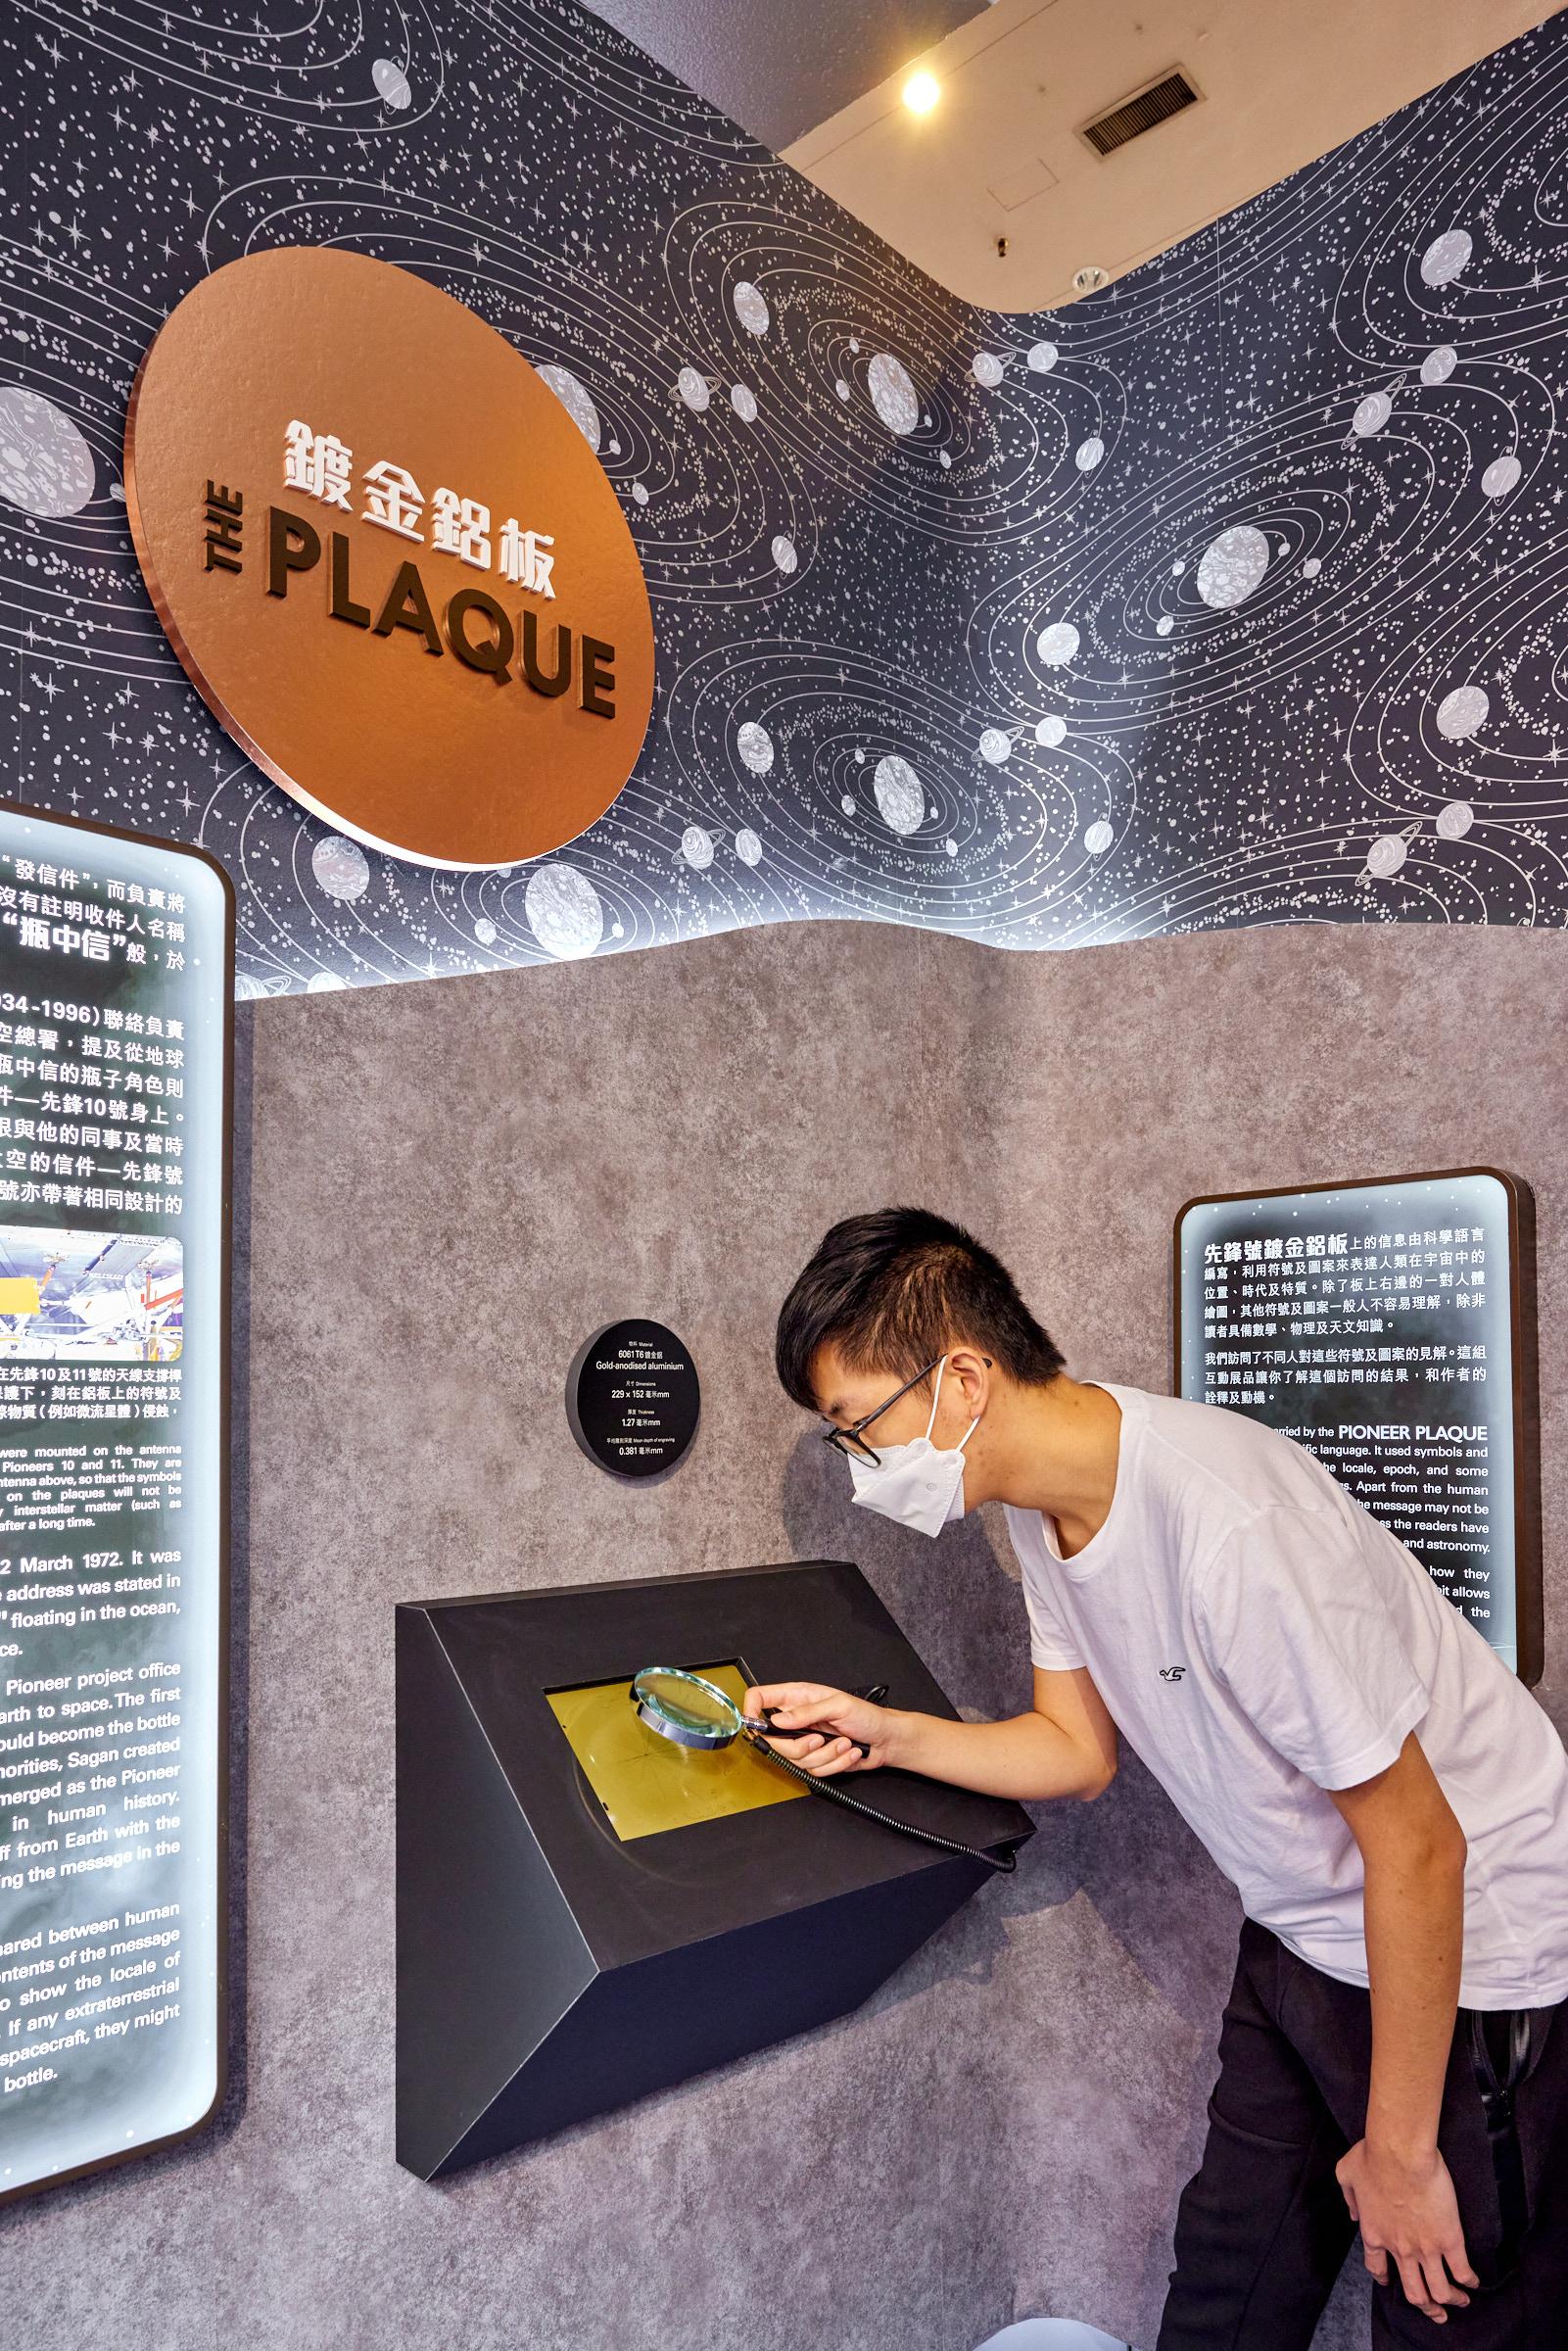 The Hong Kong Space Museum will launch a new thematic exhibition, "The Pioneer Interstellar Mission and Beyond", tomorrow (October 26). Picture shows a replica of the gold-anodised aluminum plaque carried by the two spacecraft, Pioneer 10 and 11, which were launched in the 1970s. Apart from depicting a pair of male and female figures, the metal plaque also contains information on the whereabouts of the Solar System in the Universe.